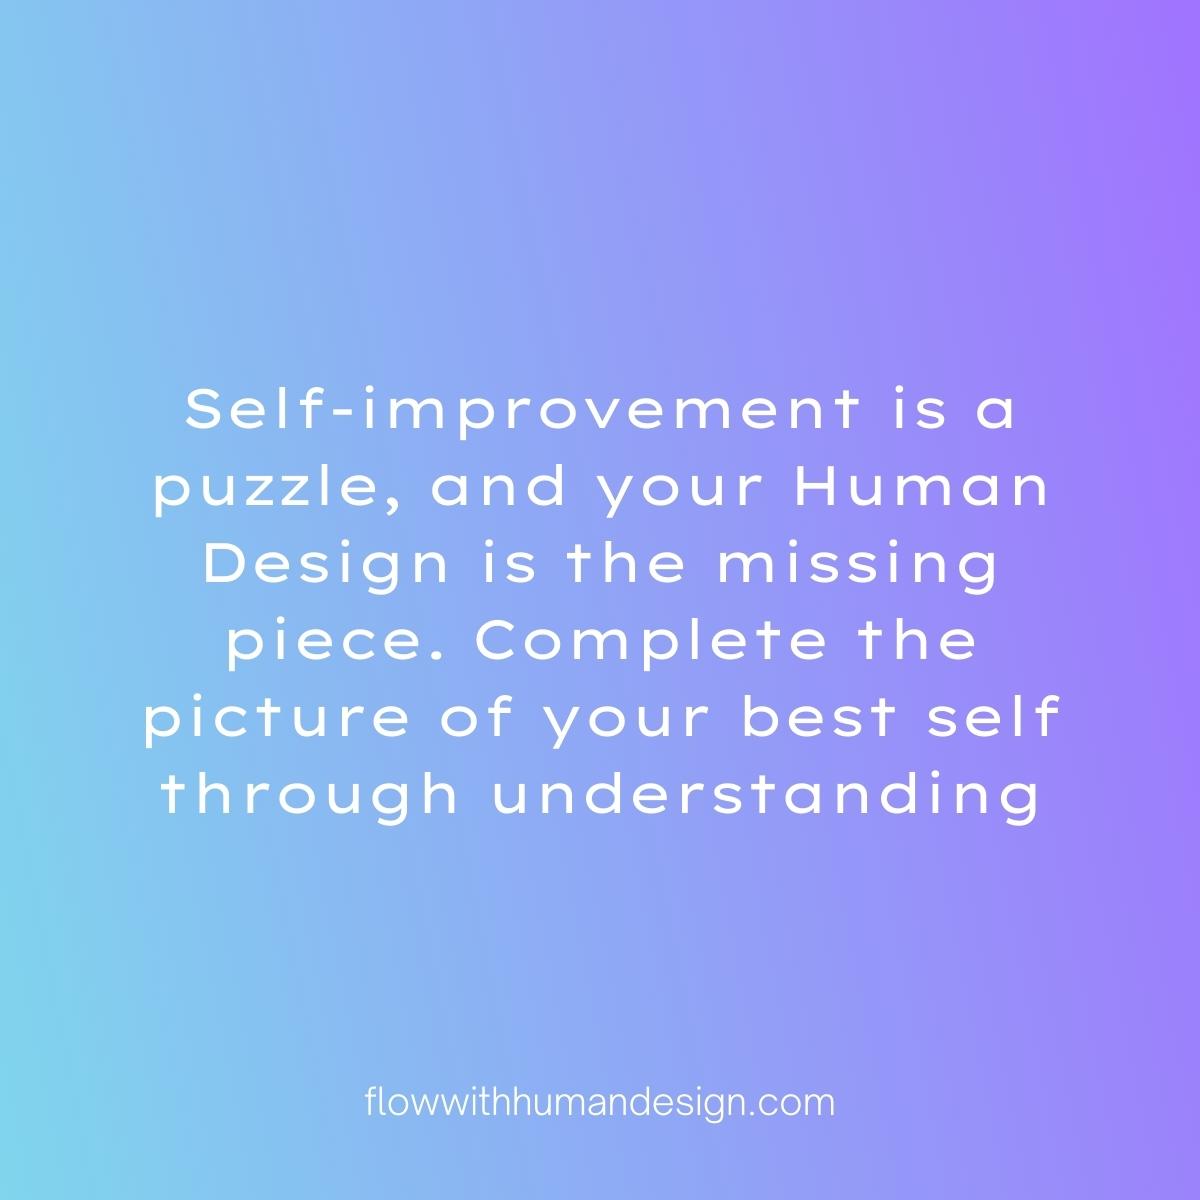 Self-improvement is a puzzle, and your Human Design is the missing piece. Complete the picture of your best self through understanding. #love #humandesign #humandesignsystem #humandesignlife #humandesigndaily #bestself #beyourbestself #yourbestself #mybestself